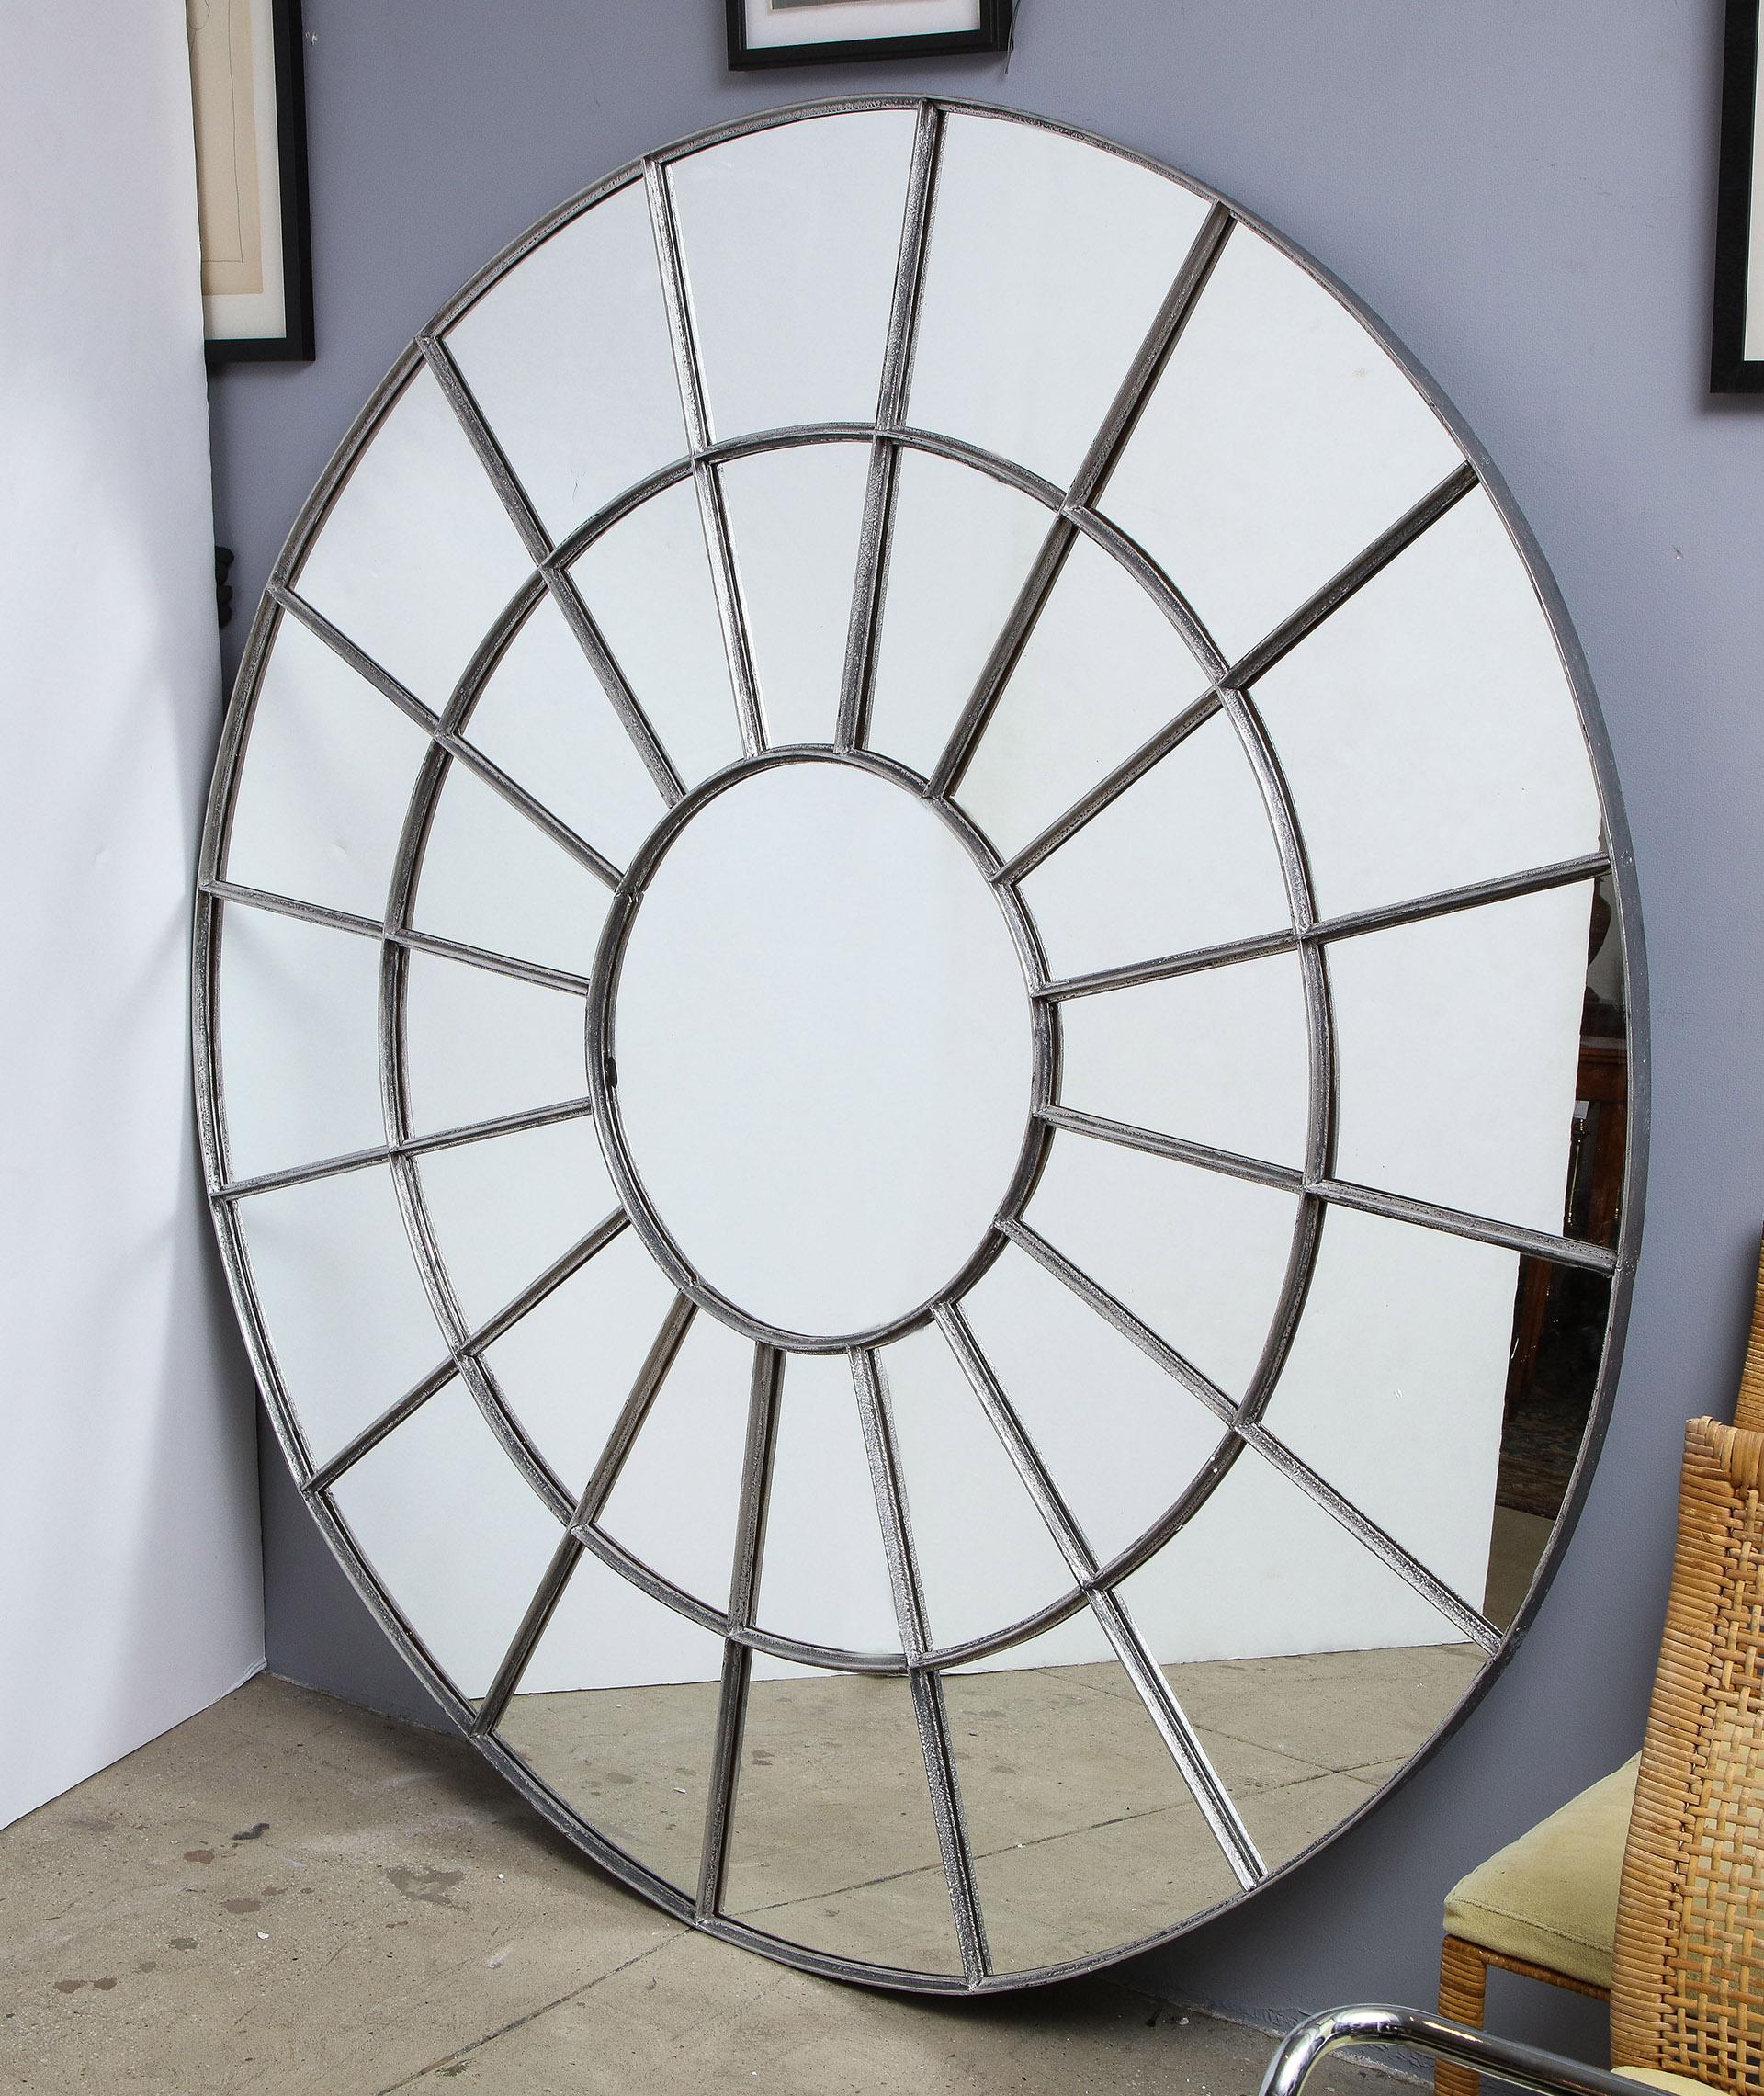 Monumental round gilt cast iron mirror

The silver gilt iron frame in a segmented design framing individual panels of mirror.